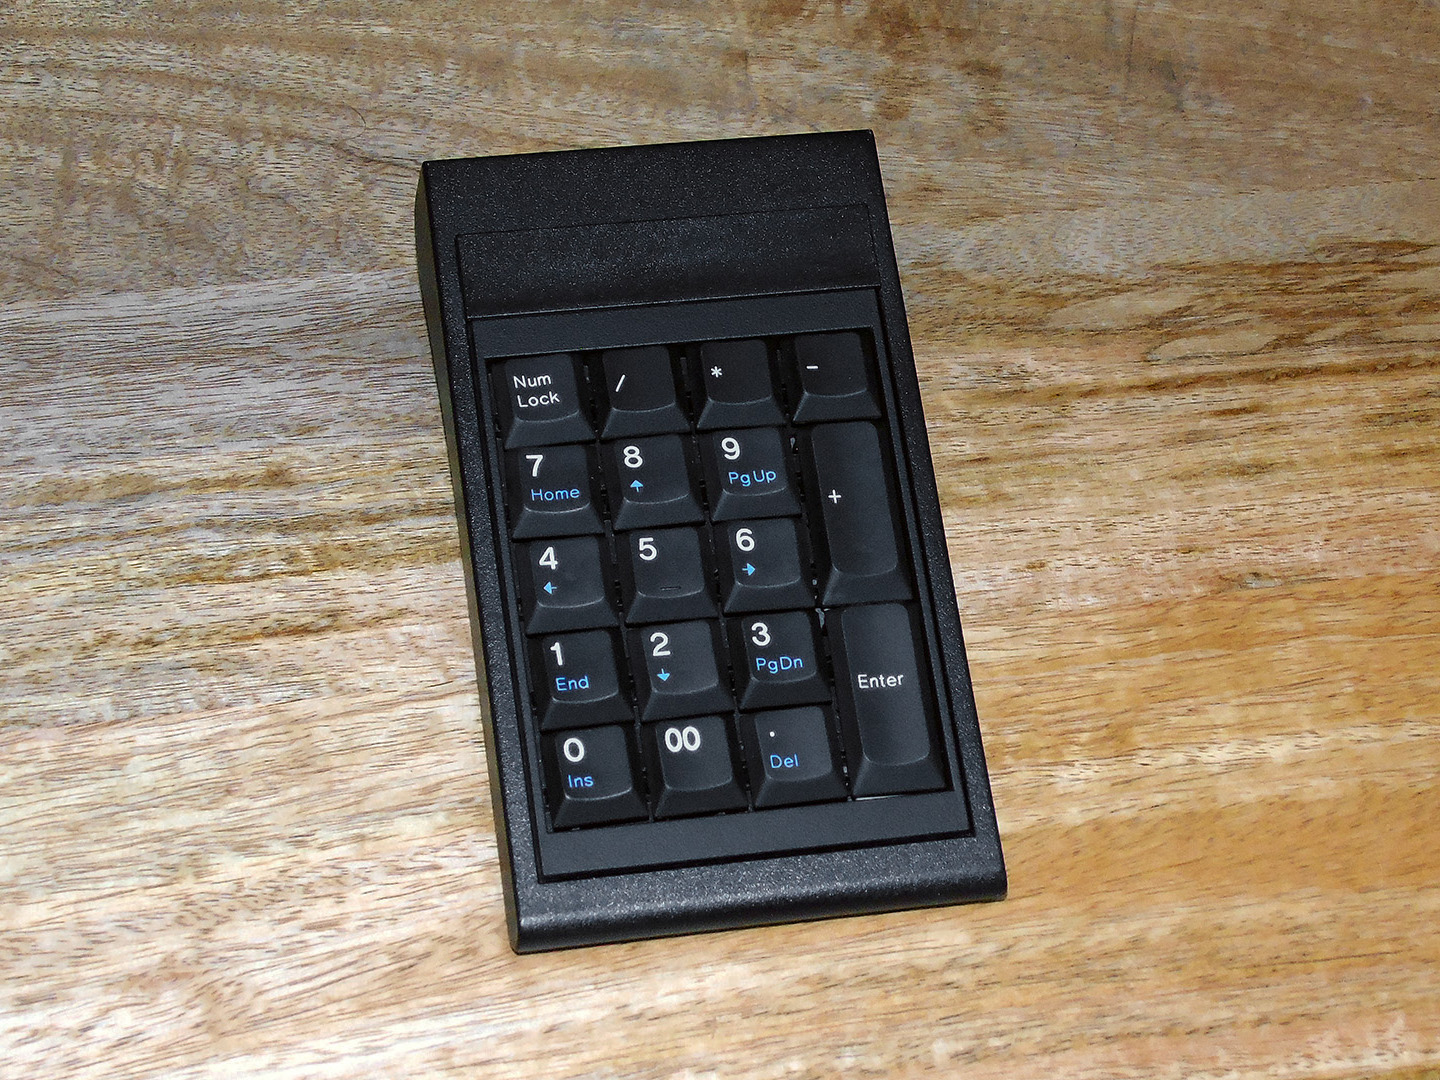 Model M4-1 numeric keypad<a class='source-link' href='/wiki?id=modelm4kpd#Sources'><sup>[ASK]</sup></a>